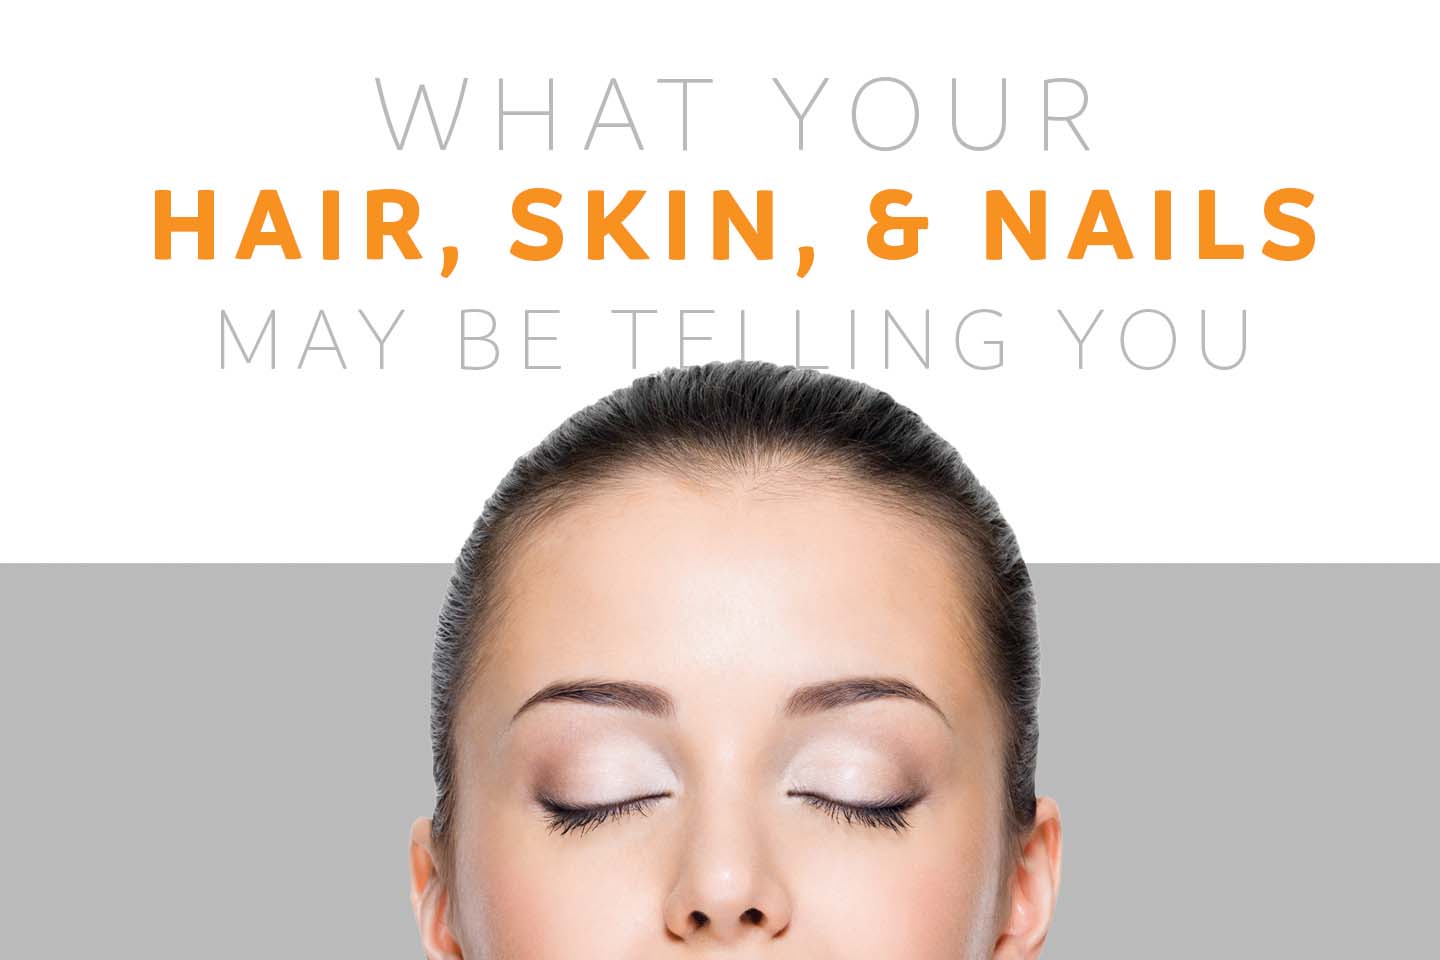 Graphic of text 'What Your Hair, Skin, & Nails Are Telling You' above a woman who has her eyes closed